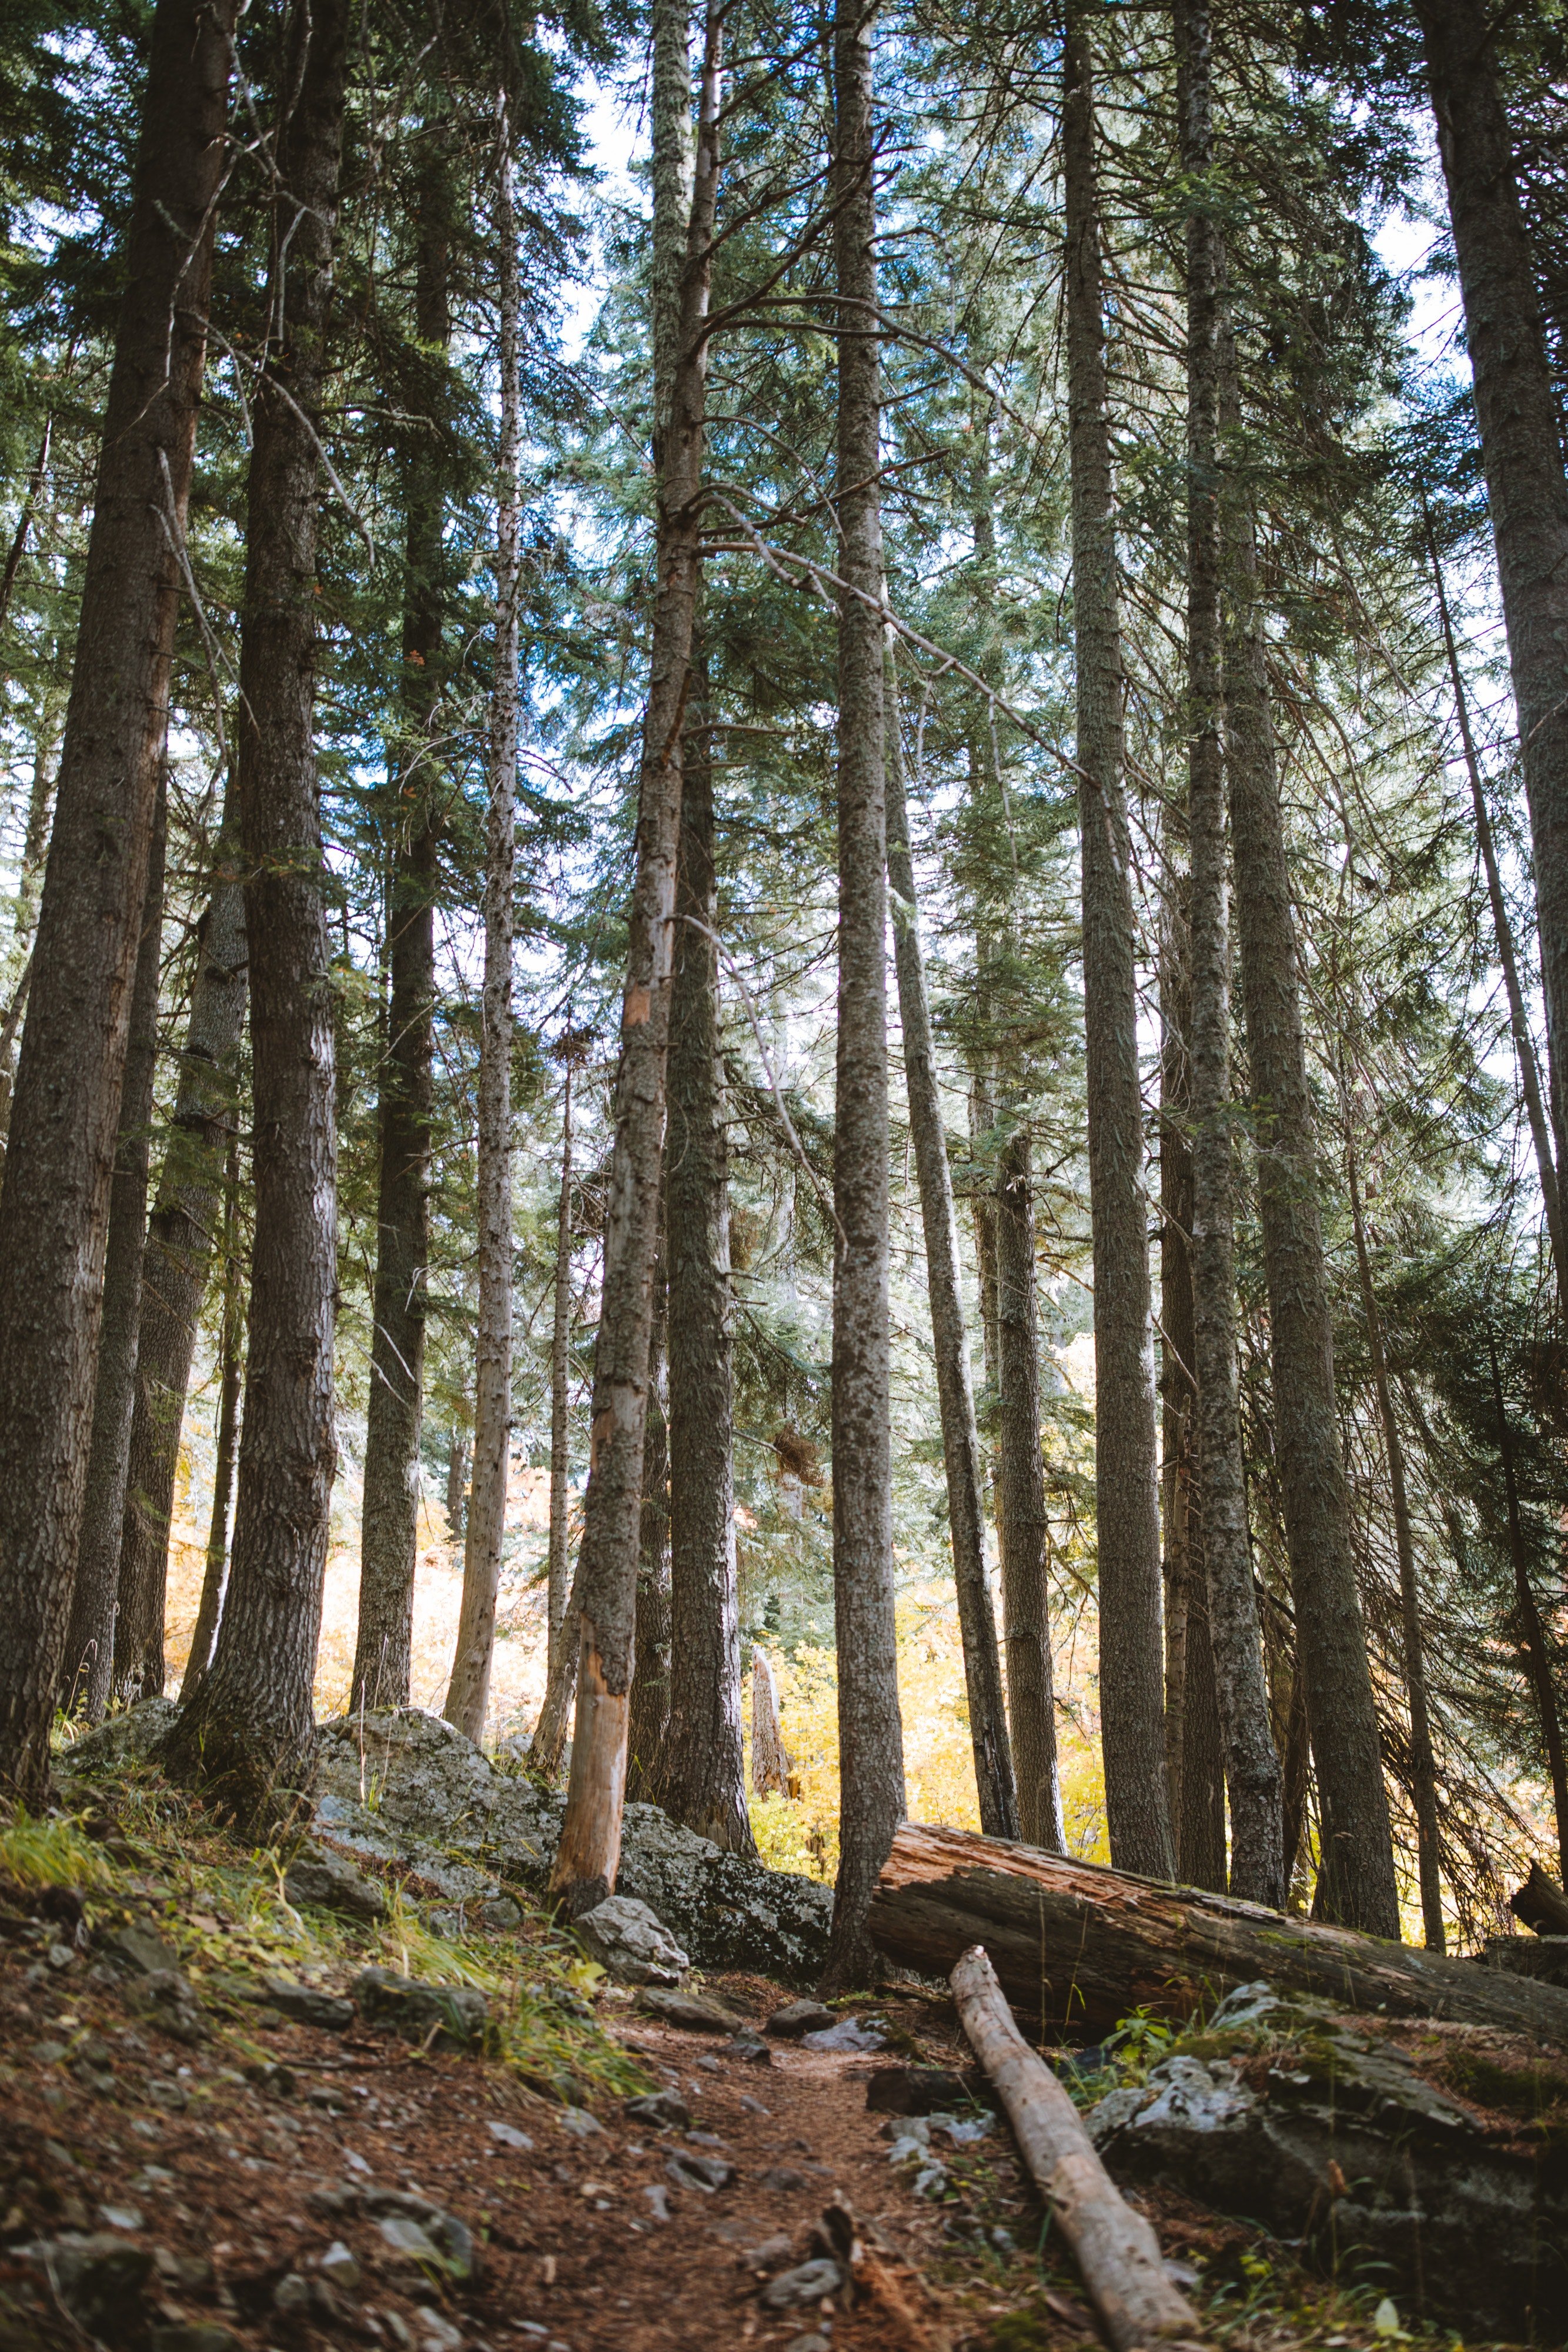 Pictured - A photo of the forest during daytime | Source: Pexels 